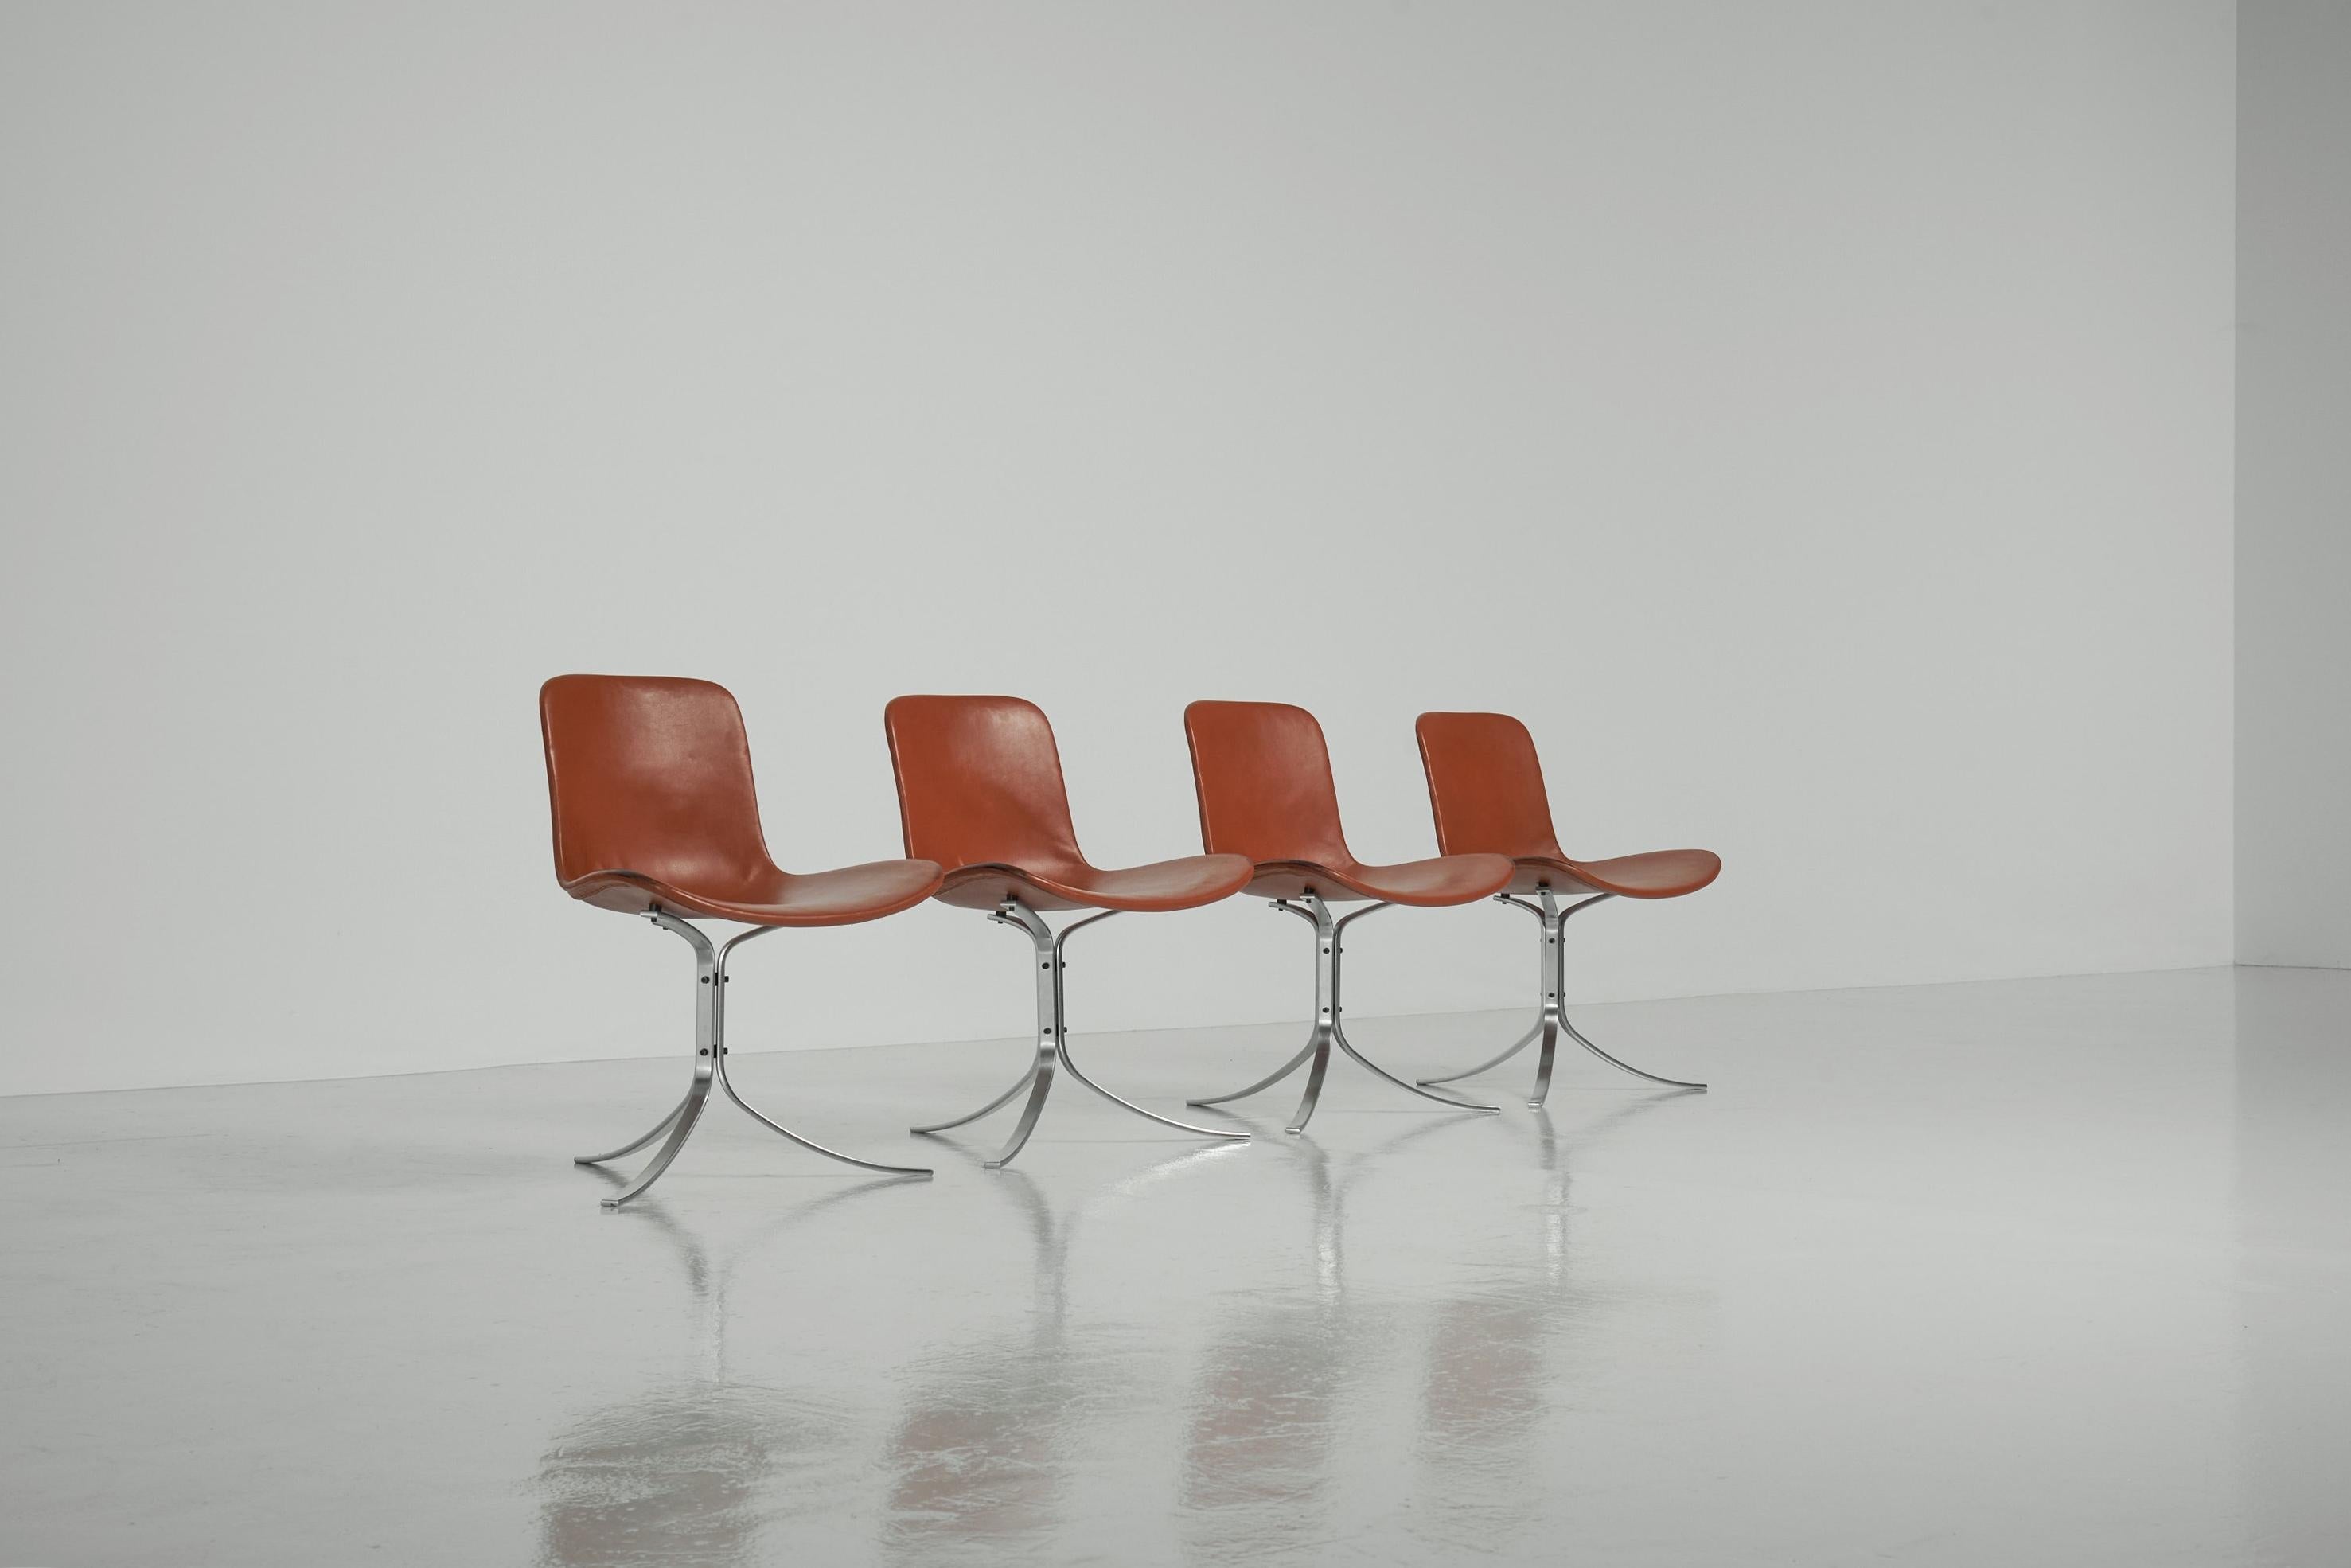 Beautiful set of 4 original PK9 tulip chairs designed by Poul Kjaerholm and manufactured by Ejvind Kold Christensen, Denmark 1961. This is for a rare and early set of 4 from EKC production, this was the first production before Fritz Hansen took the